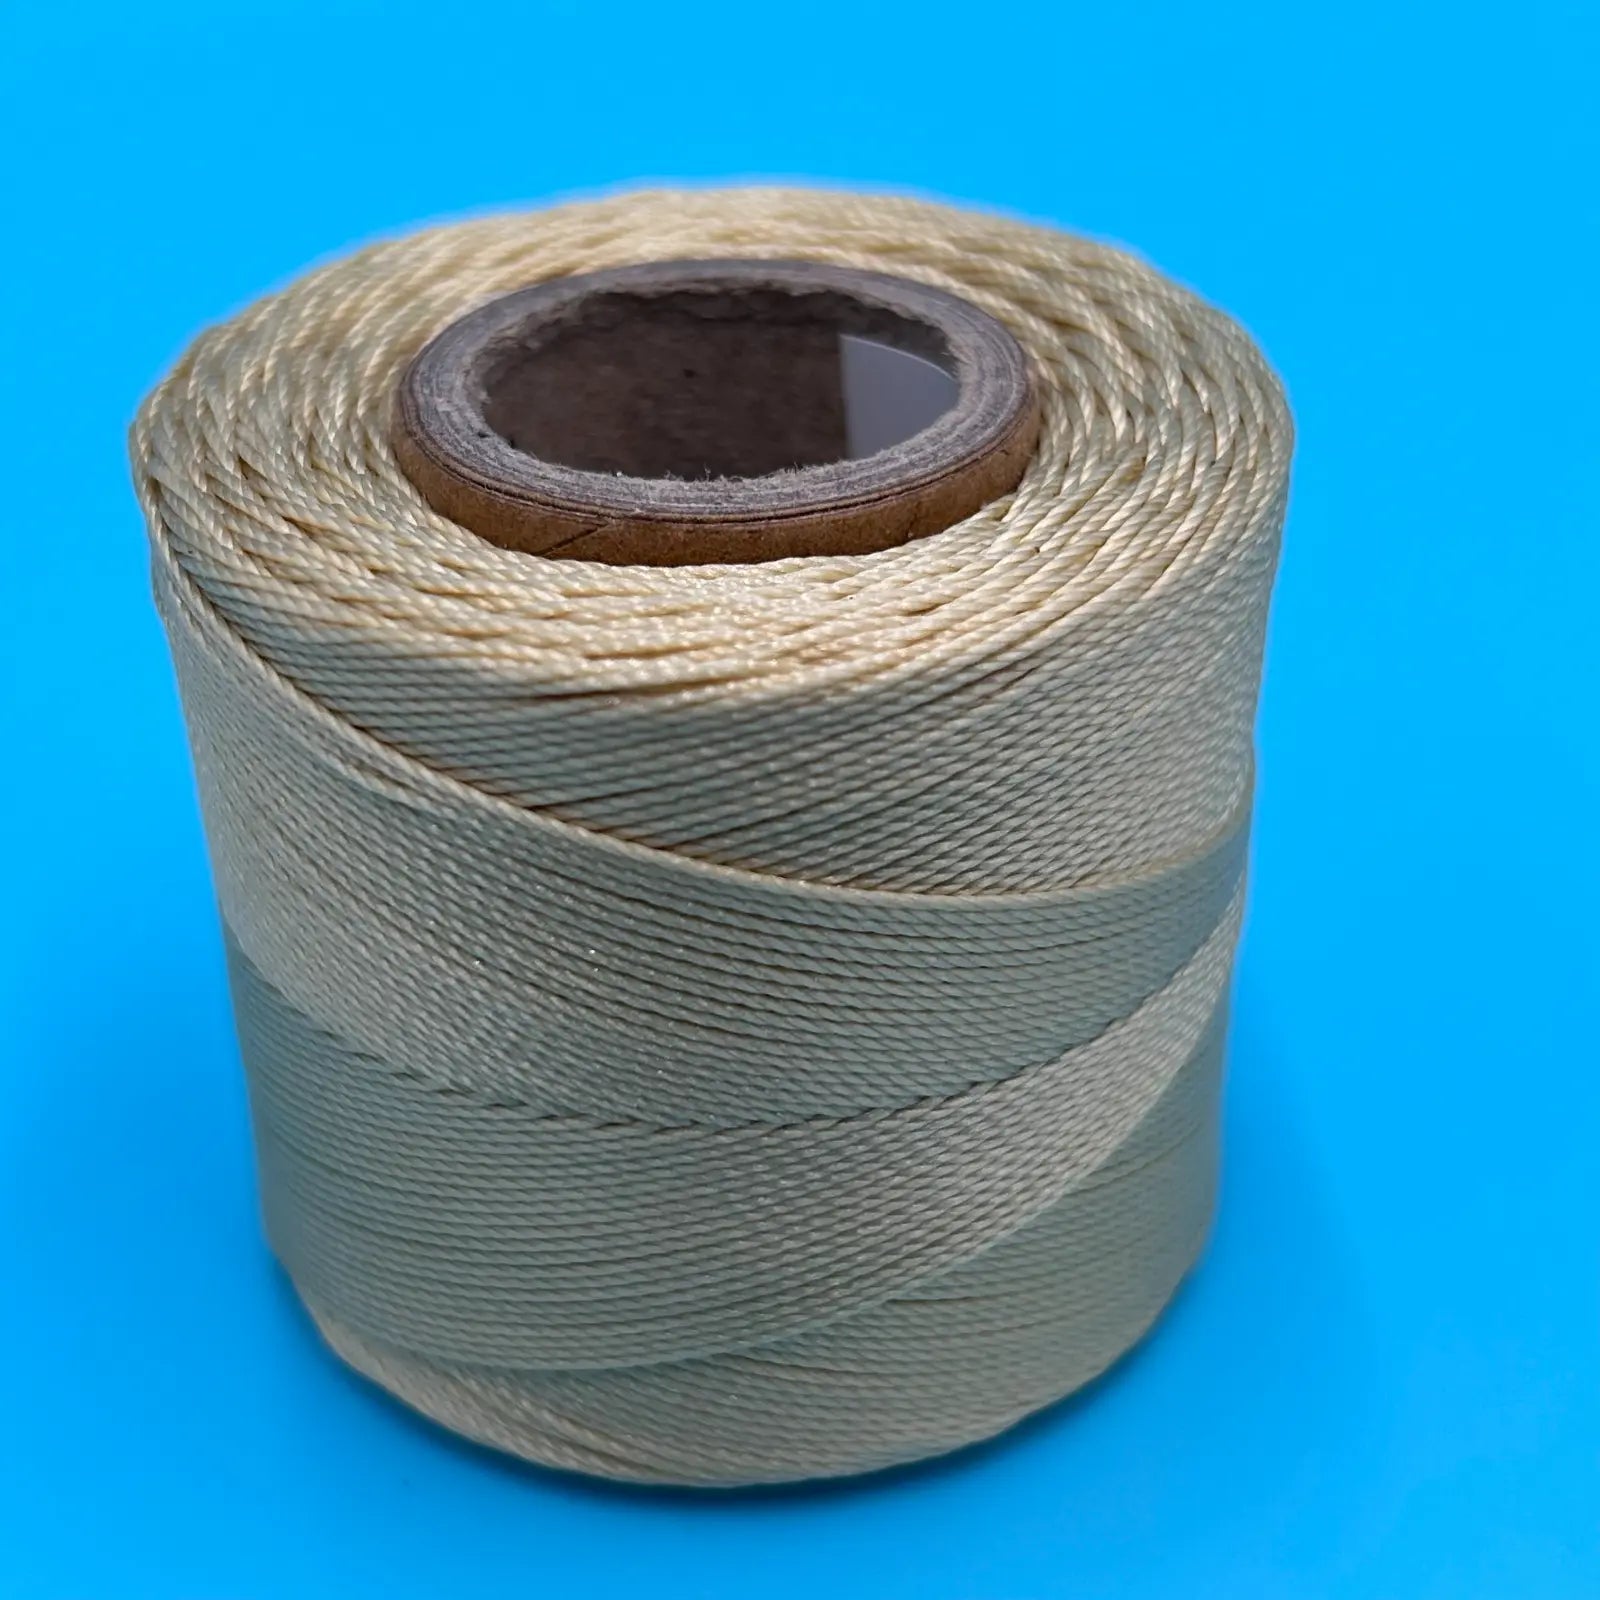 Conso #18 Bonded Nylon Heavy Hand Sewing Thread Beige